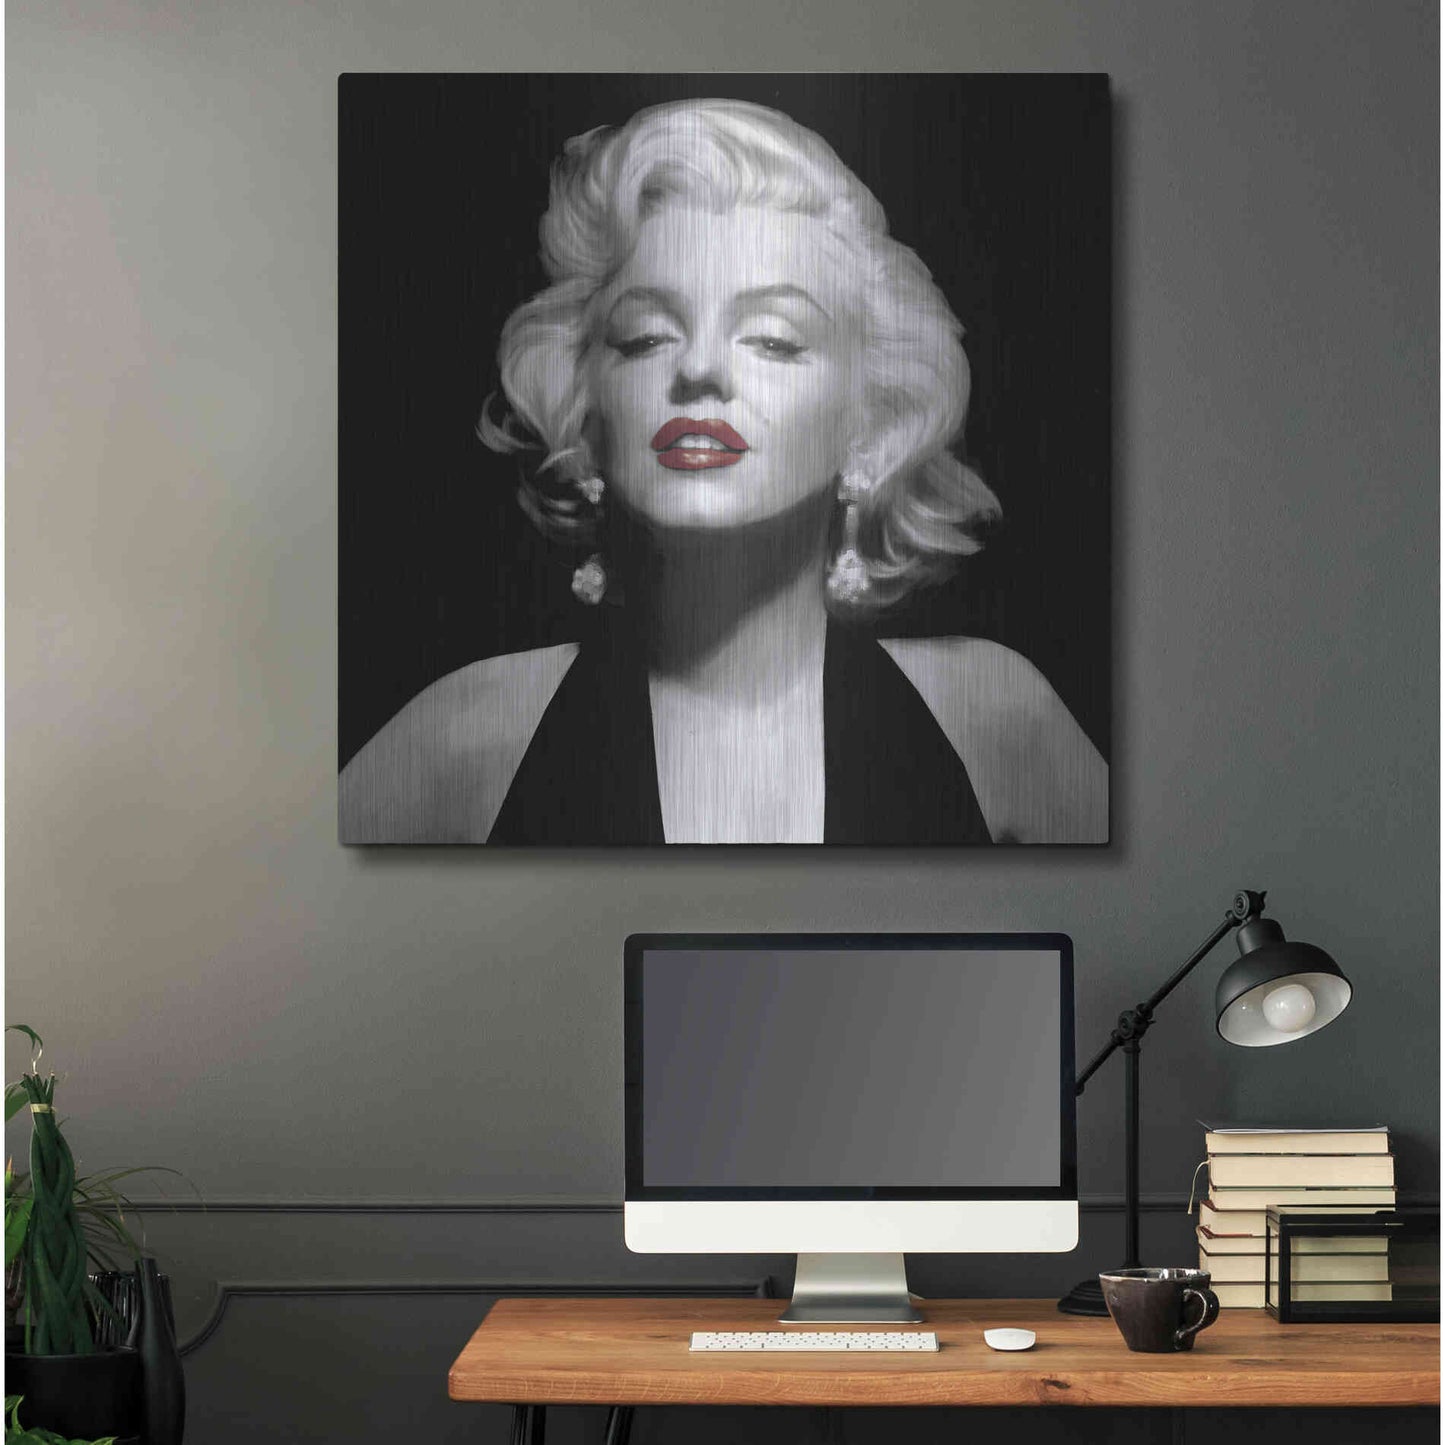 Luxe Metal Art 'Halter Top Marilyn Red Lips' by Chris Consani, Metal Wall Art,36x36